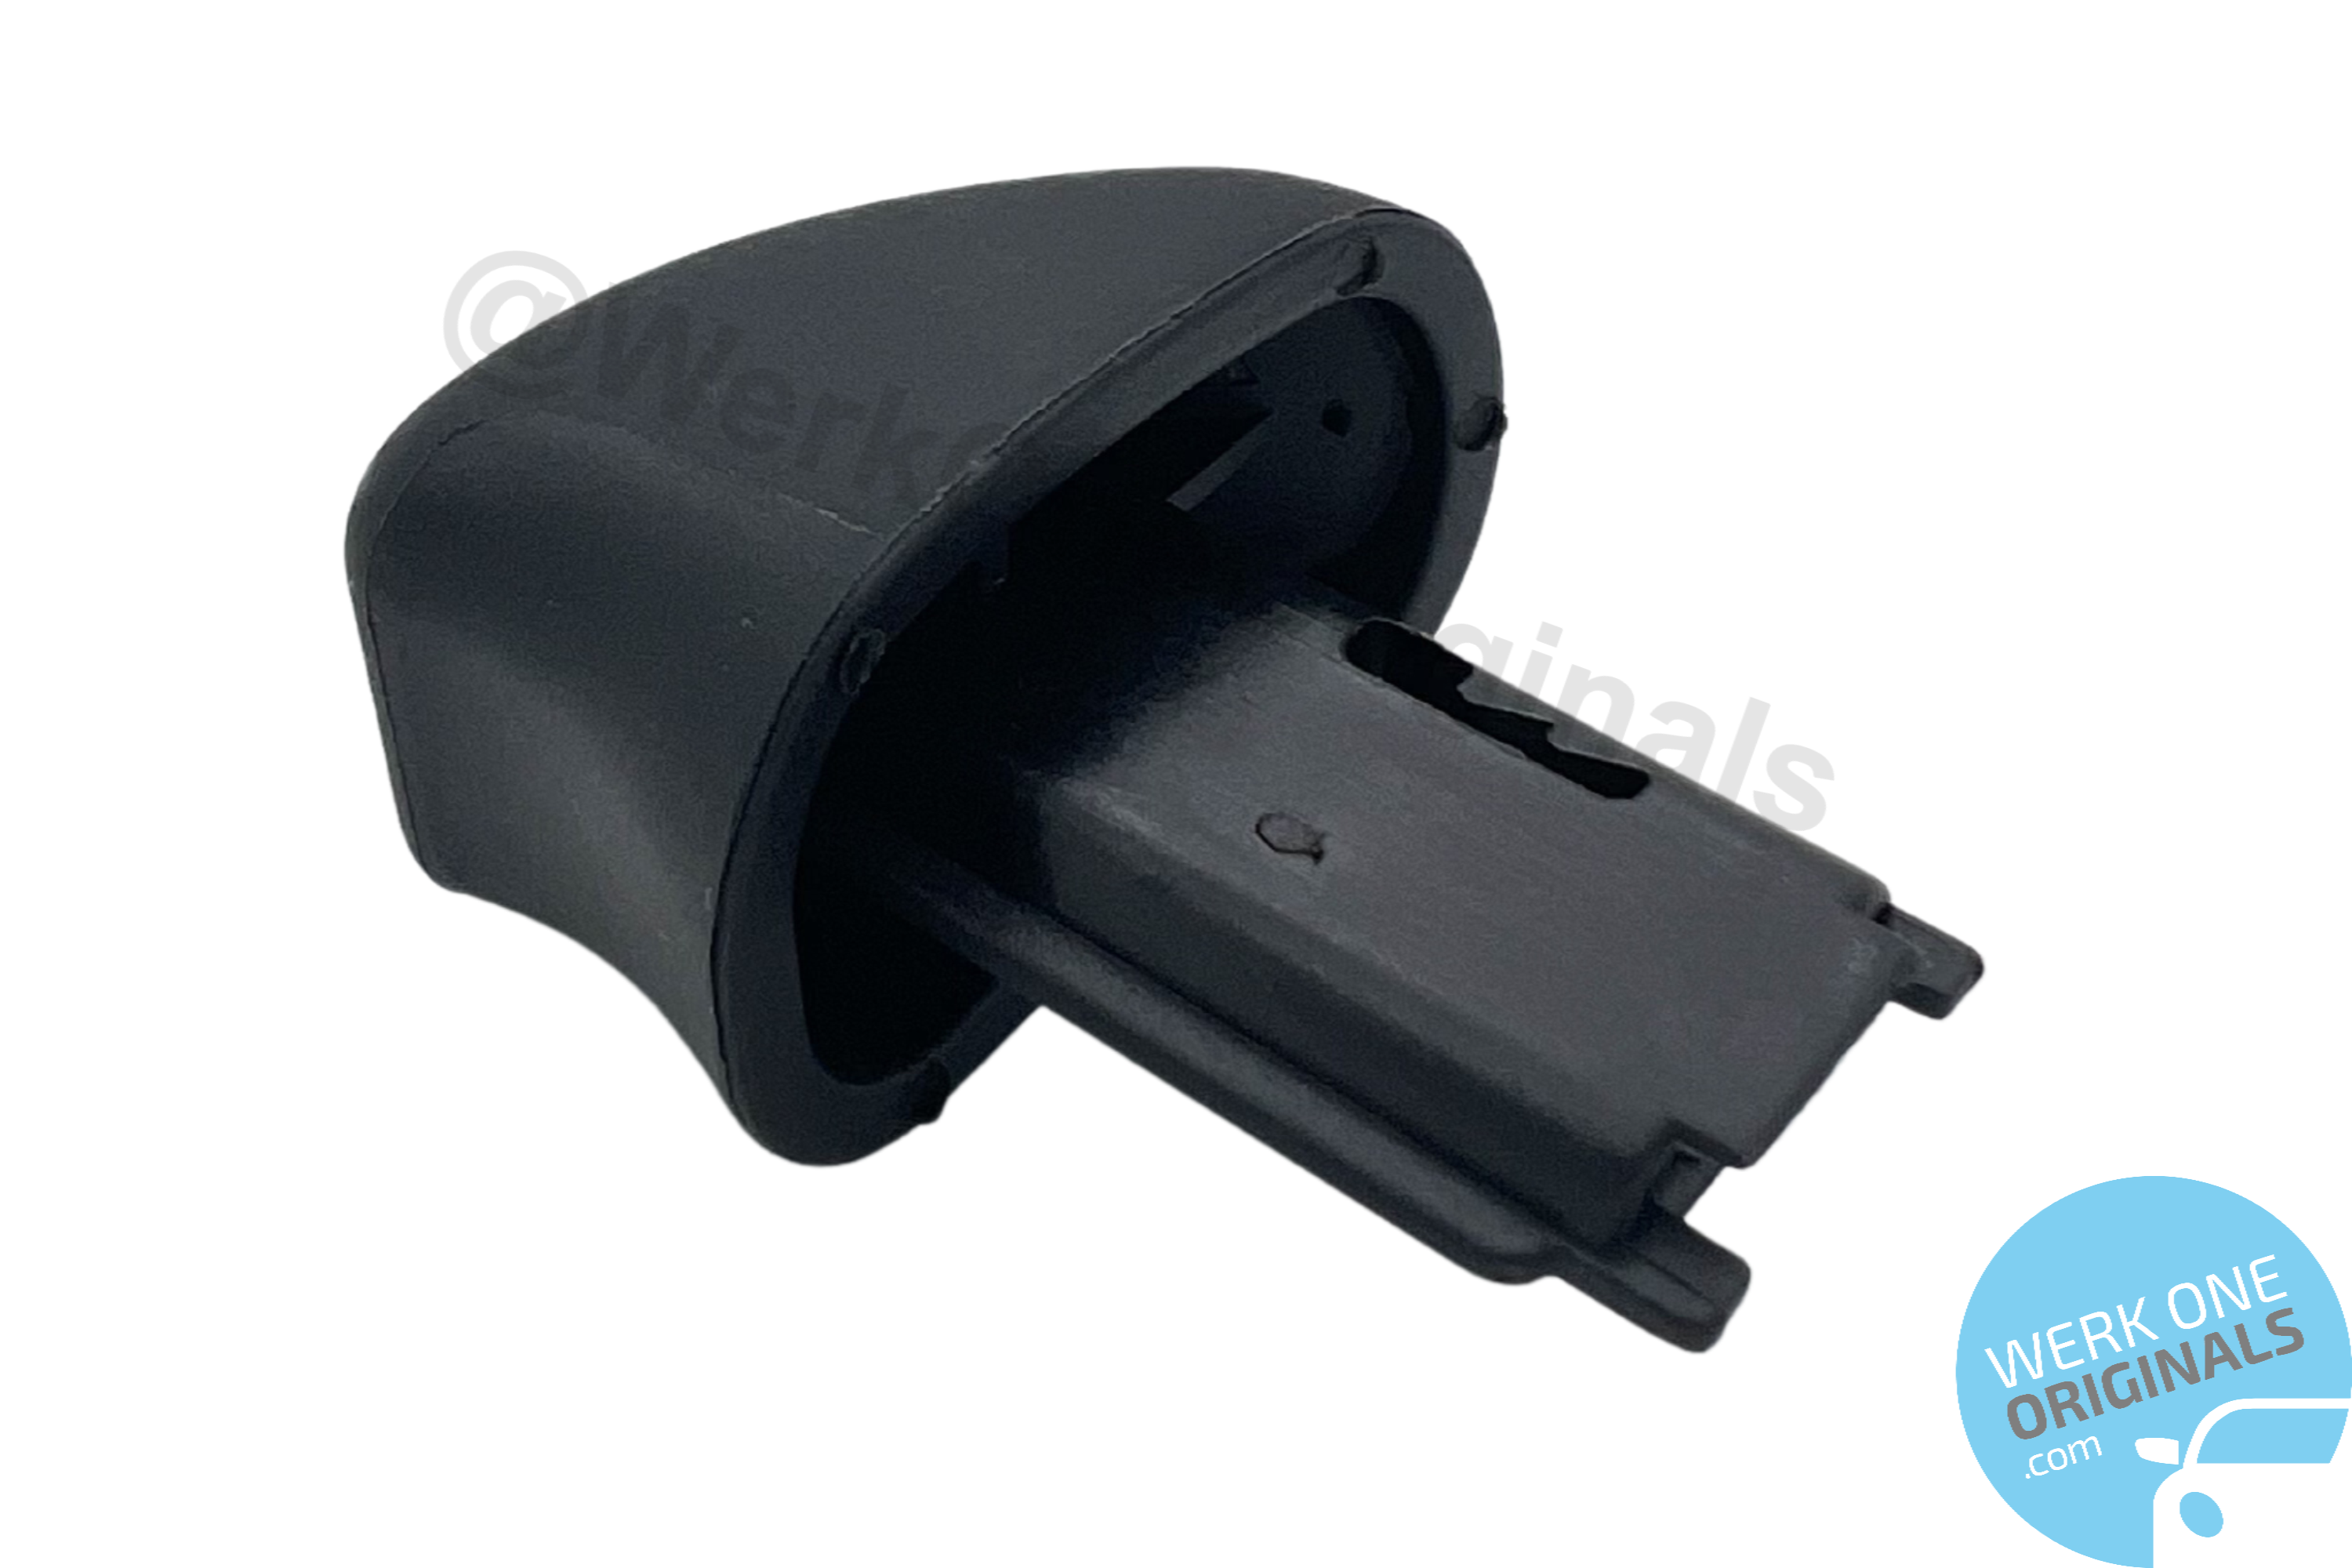 Porsche RH Seat Release Handle for Boxster Type 986 Models